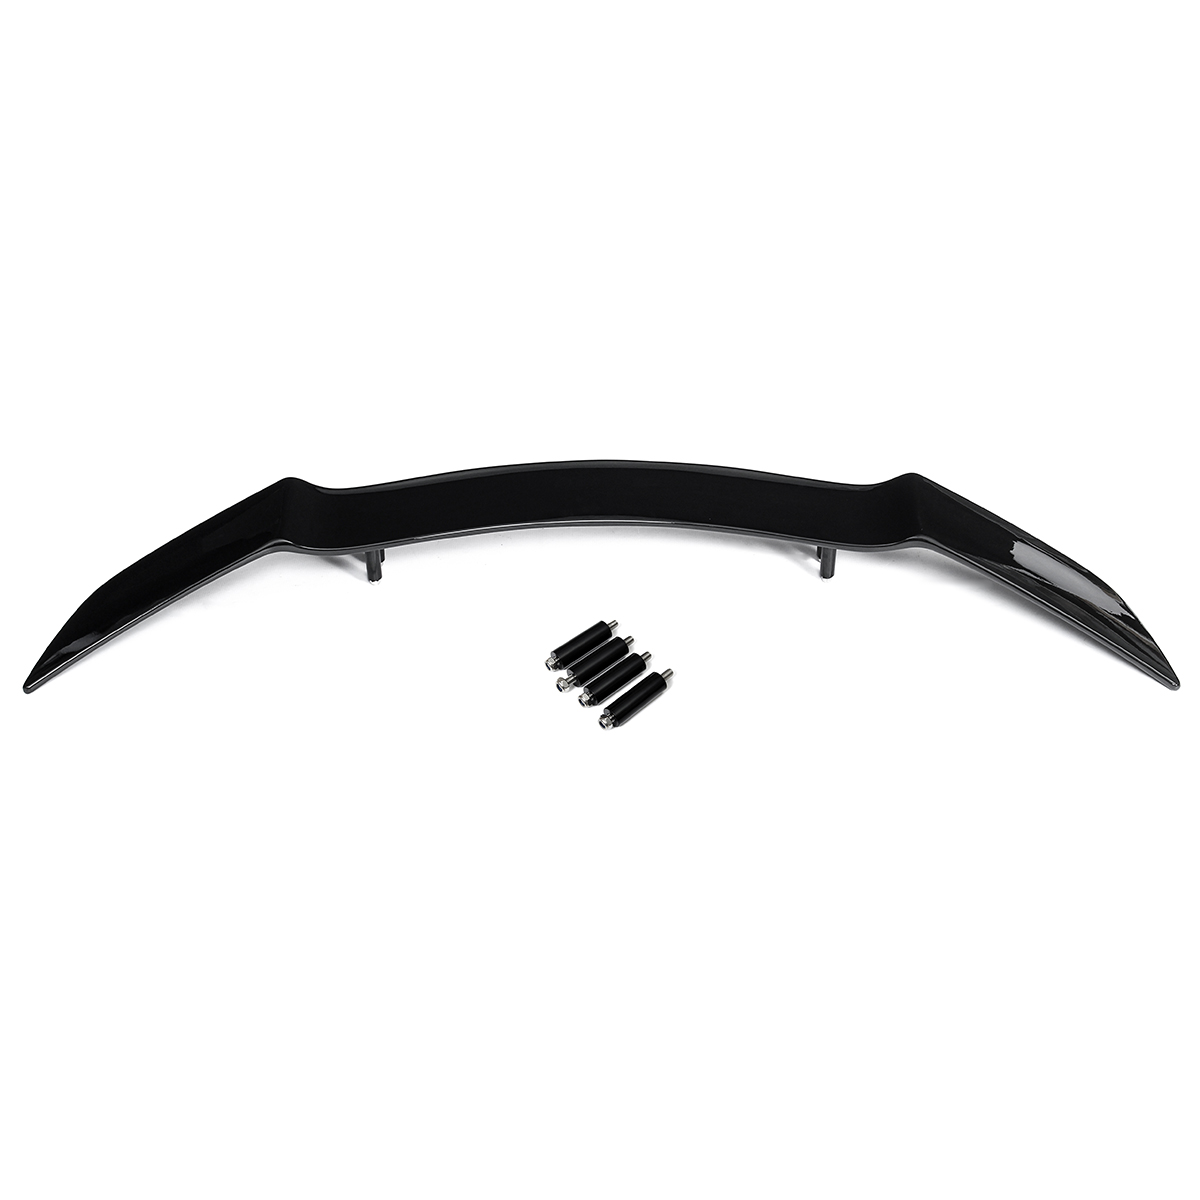 

57'' Glossy Black Adjustable Wide ROWEN Style Trunk Car Spoiler Wing For Ford Mustang BMW Z4 Civic Honda